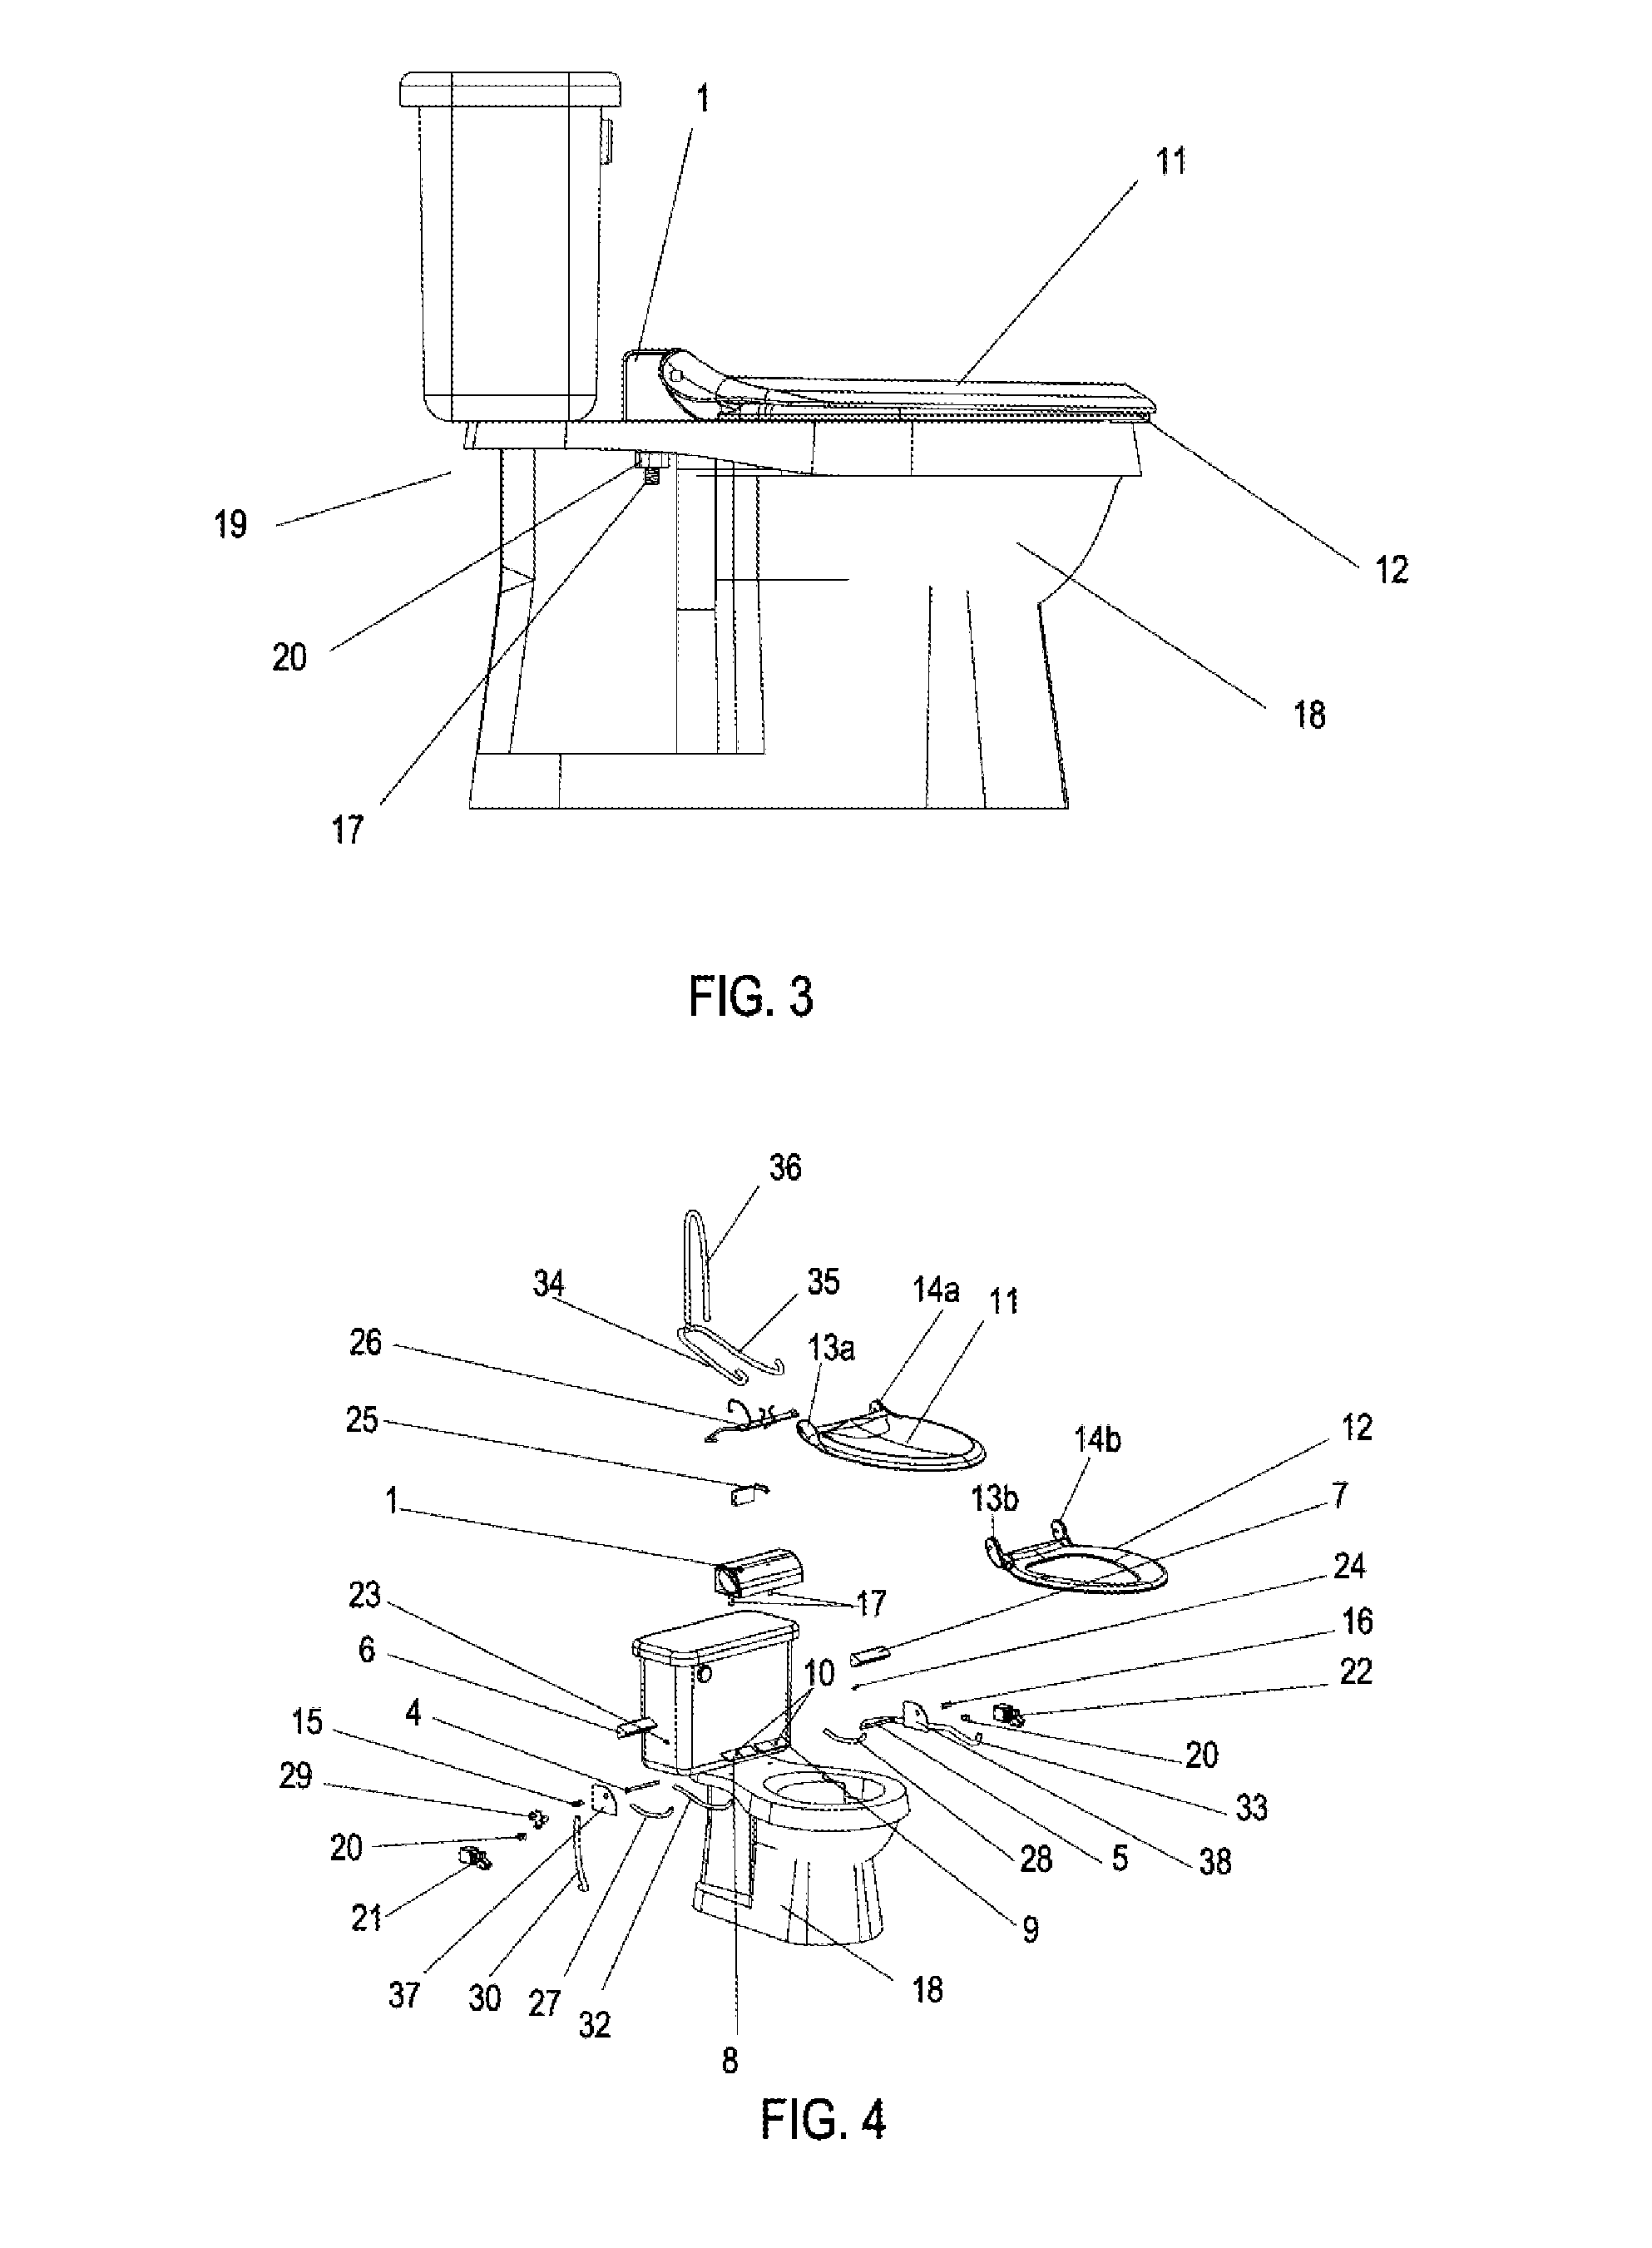 Hydraulic Actuator Device for Raising and Lowering a Seat and Lid